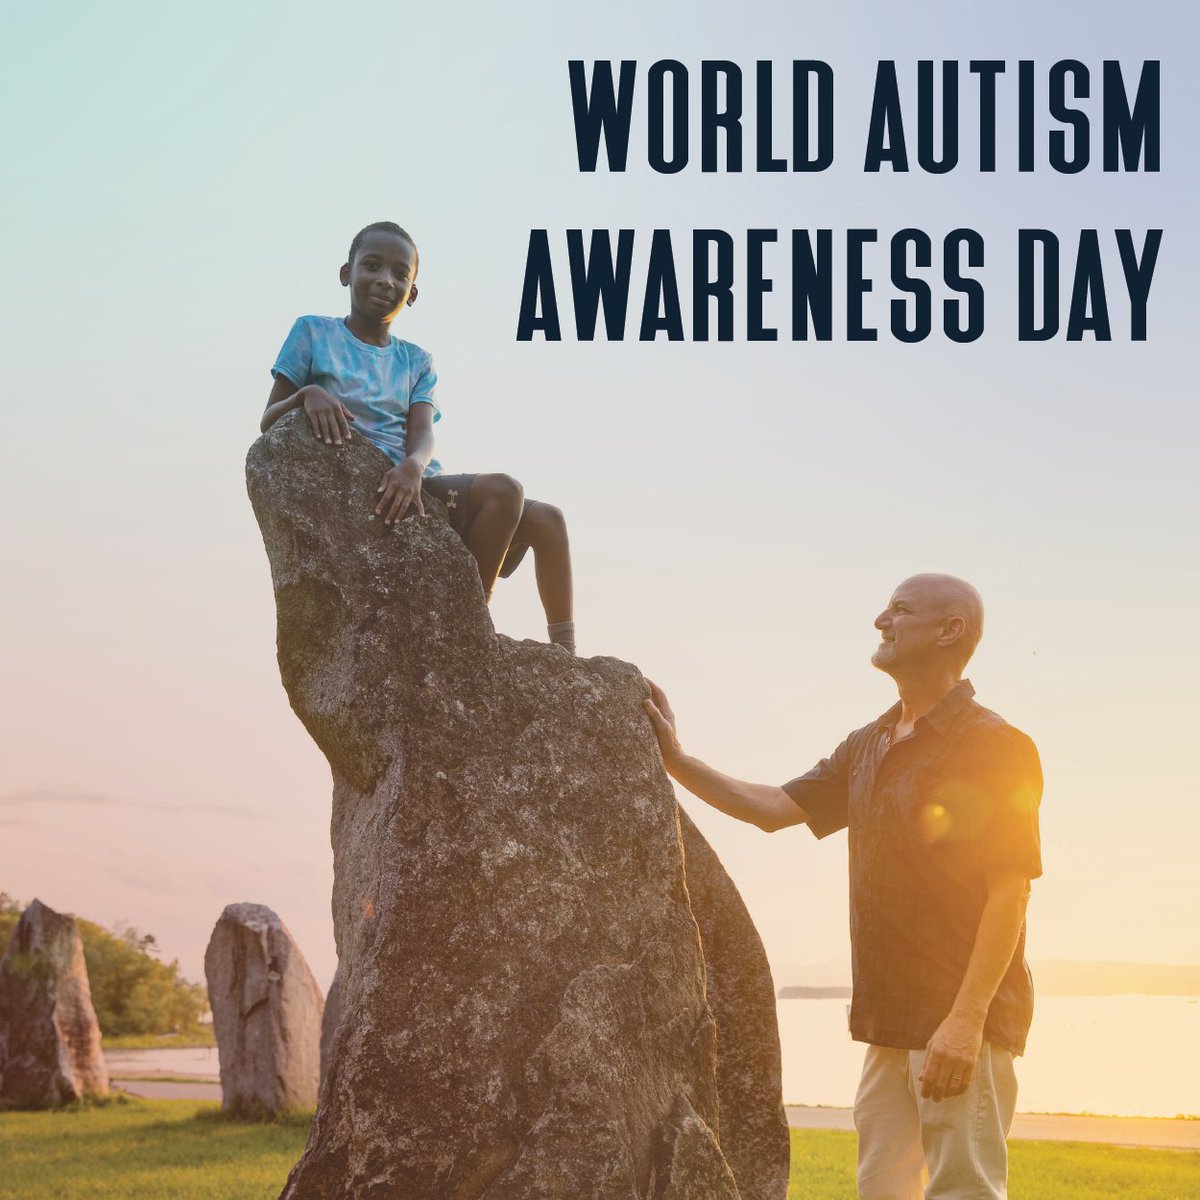 This #WorldAutismAwarenessDay, celebrate neurodiversity & the unique strengths of young people on the autism spectrum. Mentors can play a crucial role in fostering inclusion & providing support. For detailed resources, visit 👉 tinyurl.com/dxcuznws #MentoringAmplifies